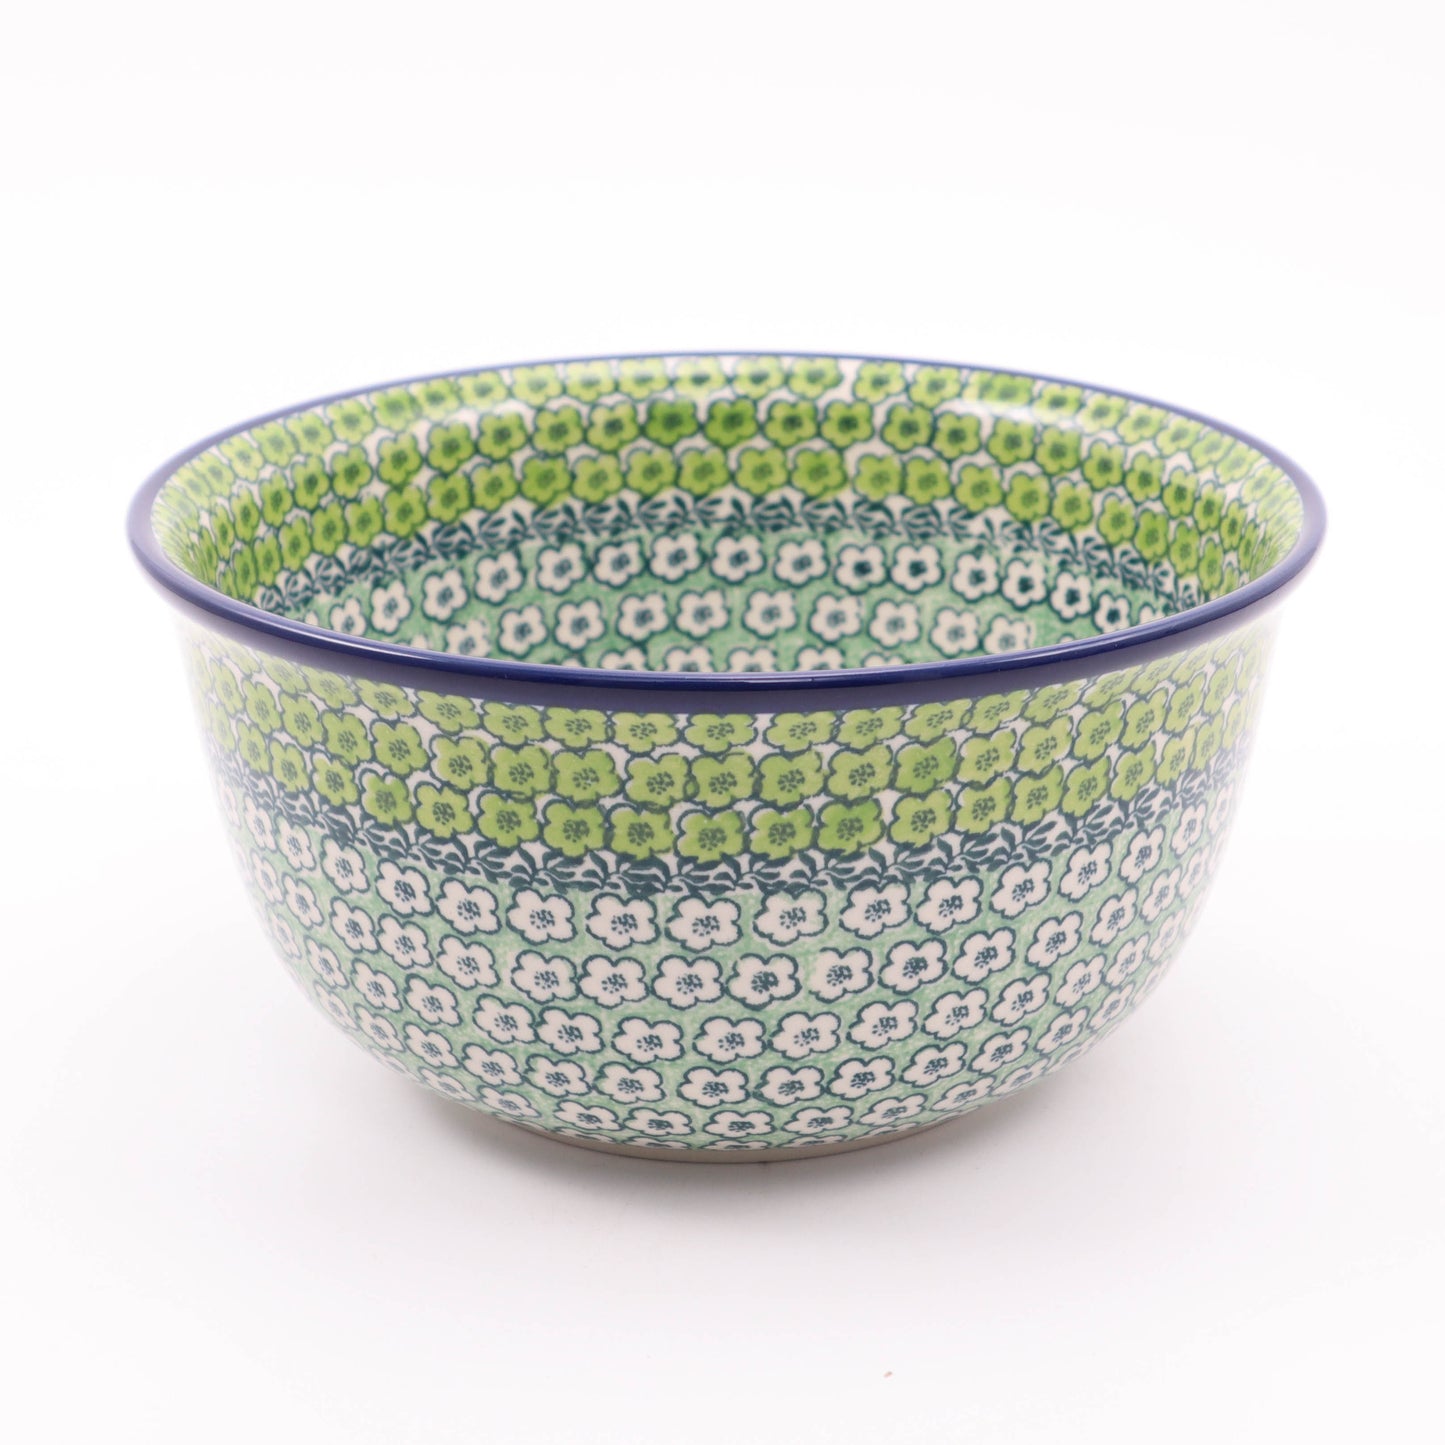 8.5"x4" Bowl. Pattern: Lucky Charms